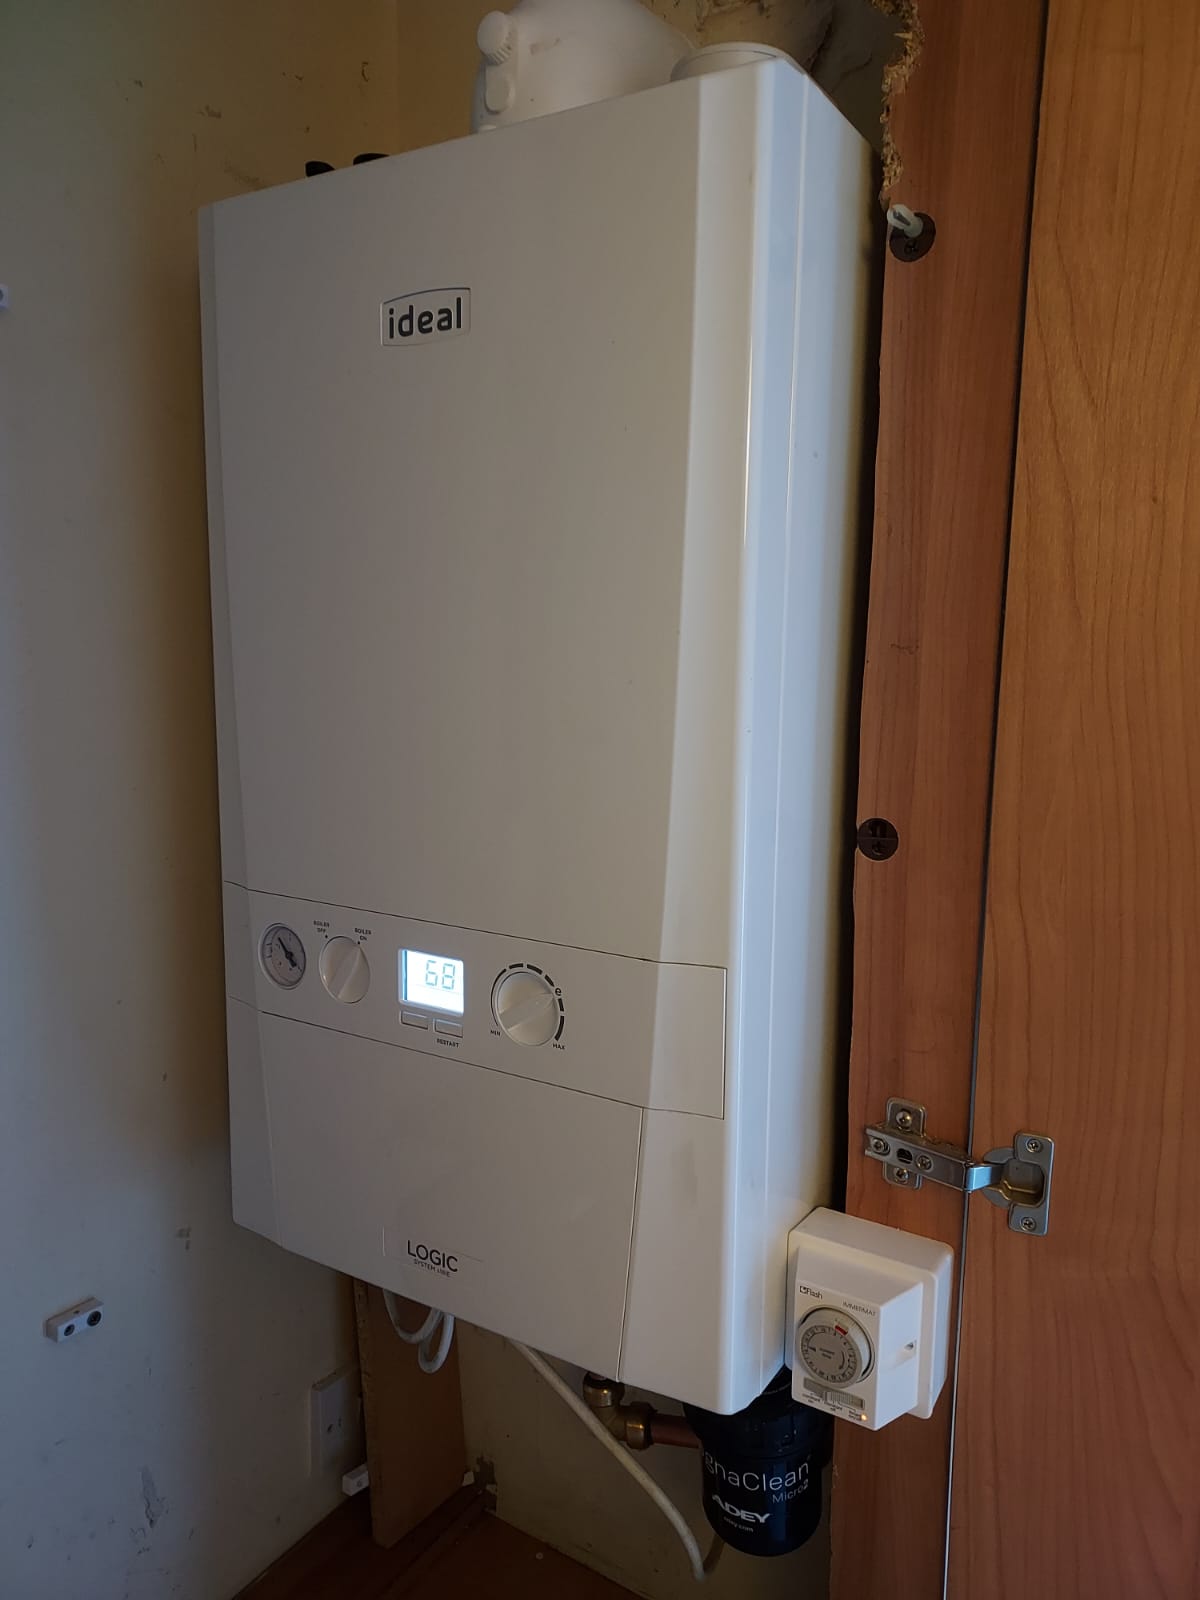 Ideal Logic Boiler Tested and Working Perfectly